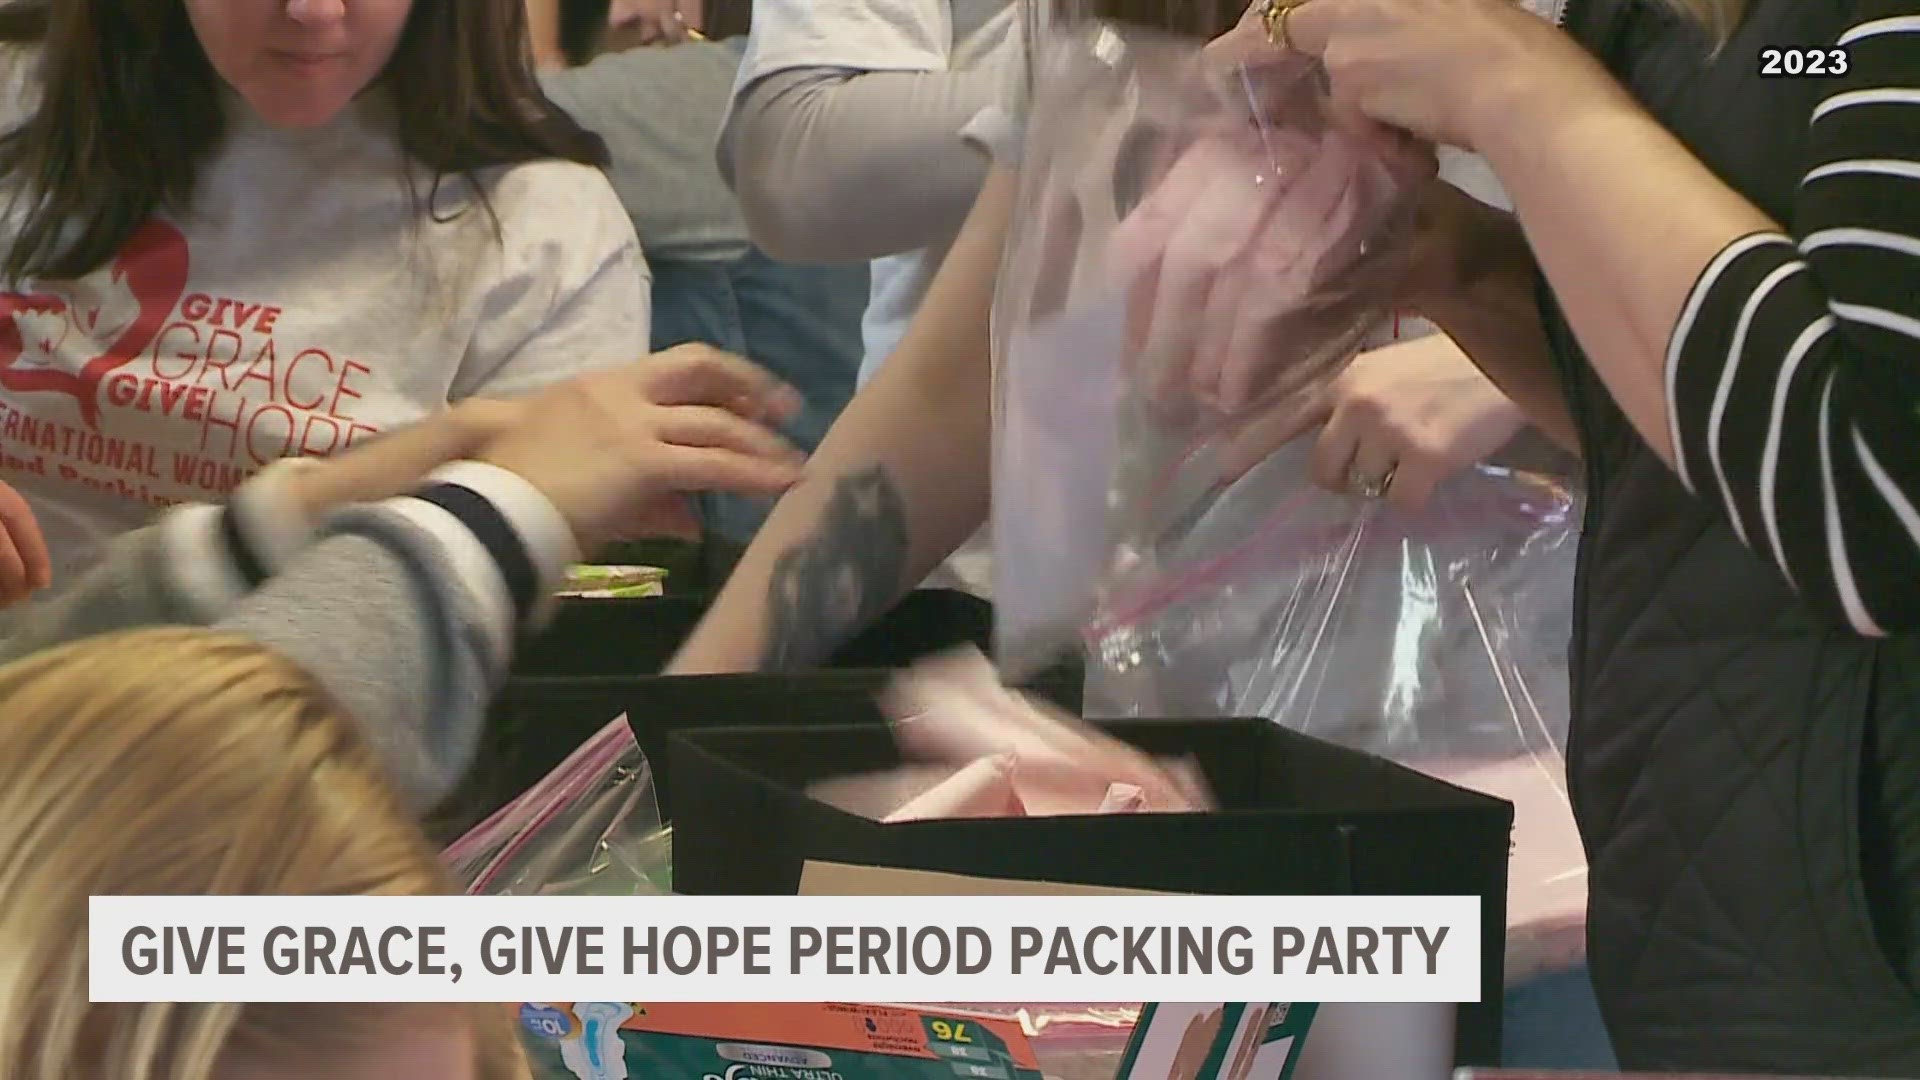 Give Grace, Give Hope is hosting its fifth annual "period packing party", during which volunteers will put together menstrual products to be donated across Iowa.